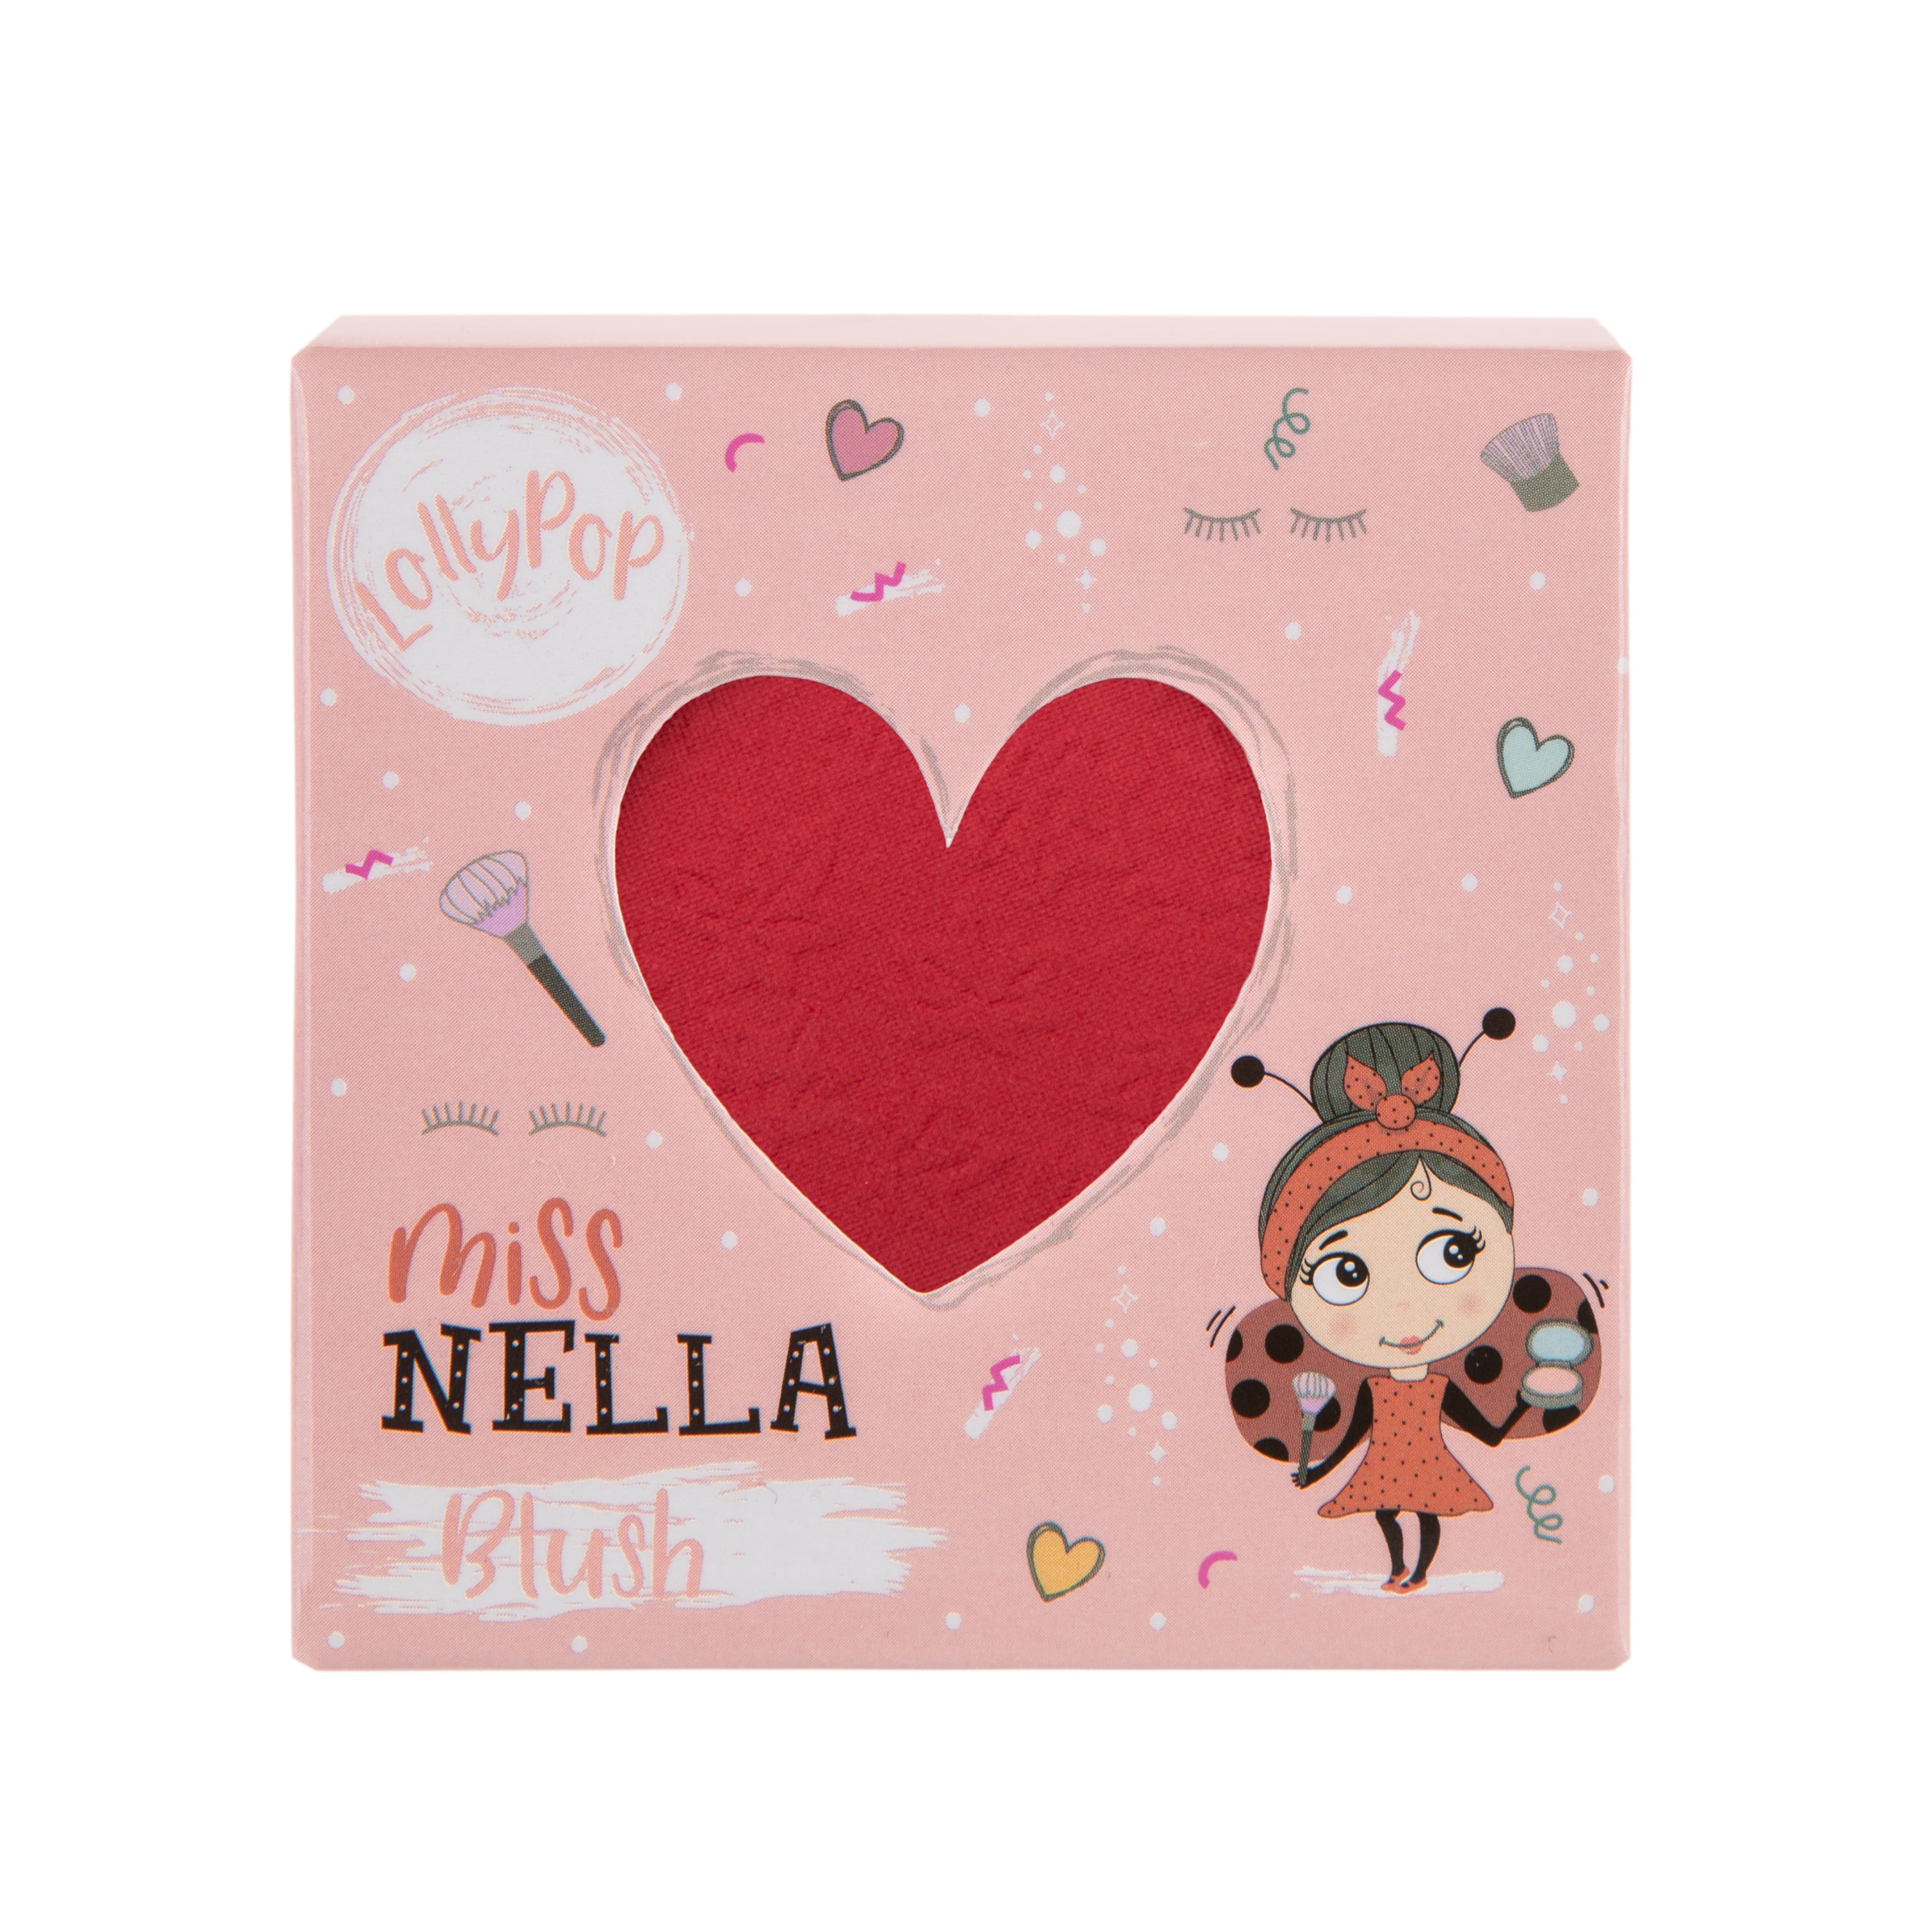 Cheeky Lollypop Non-Toxic Blush for Kids With Gentle Glow